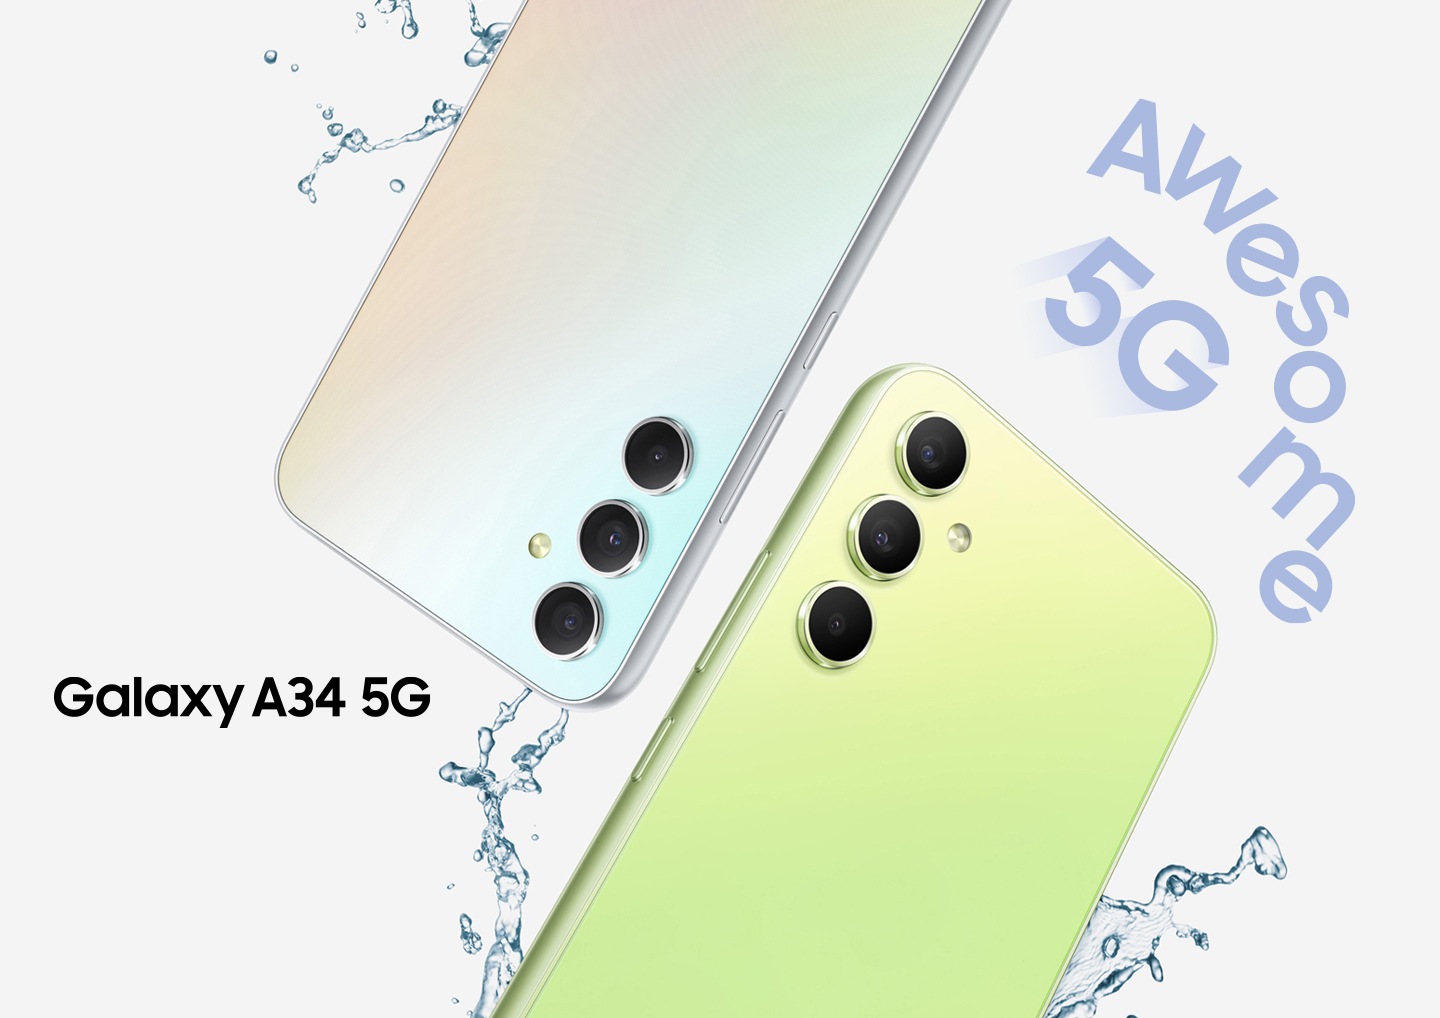 Two Galaxy A34 5Gs show their top halves of their backsides, one in Awesome Violet and the other in Awesome Lime. Water droplets are splashing around the devices "Awesome 5G“.